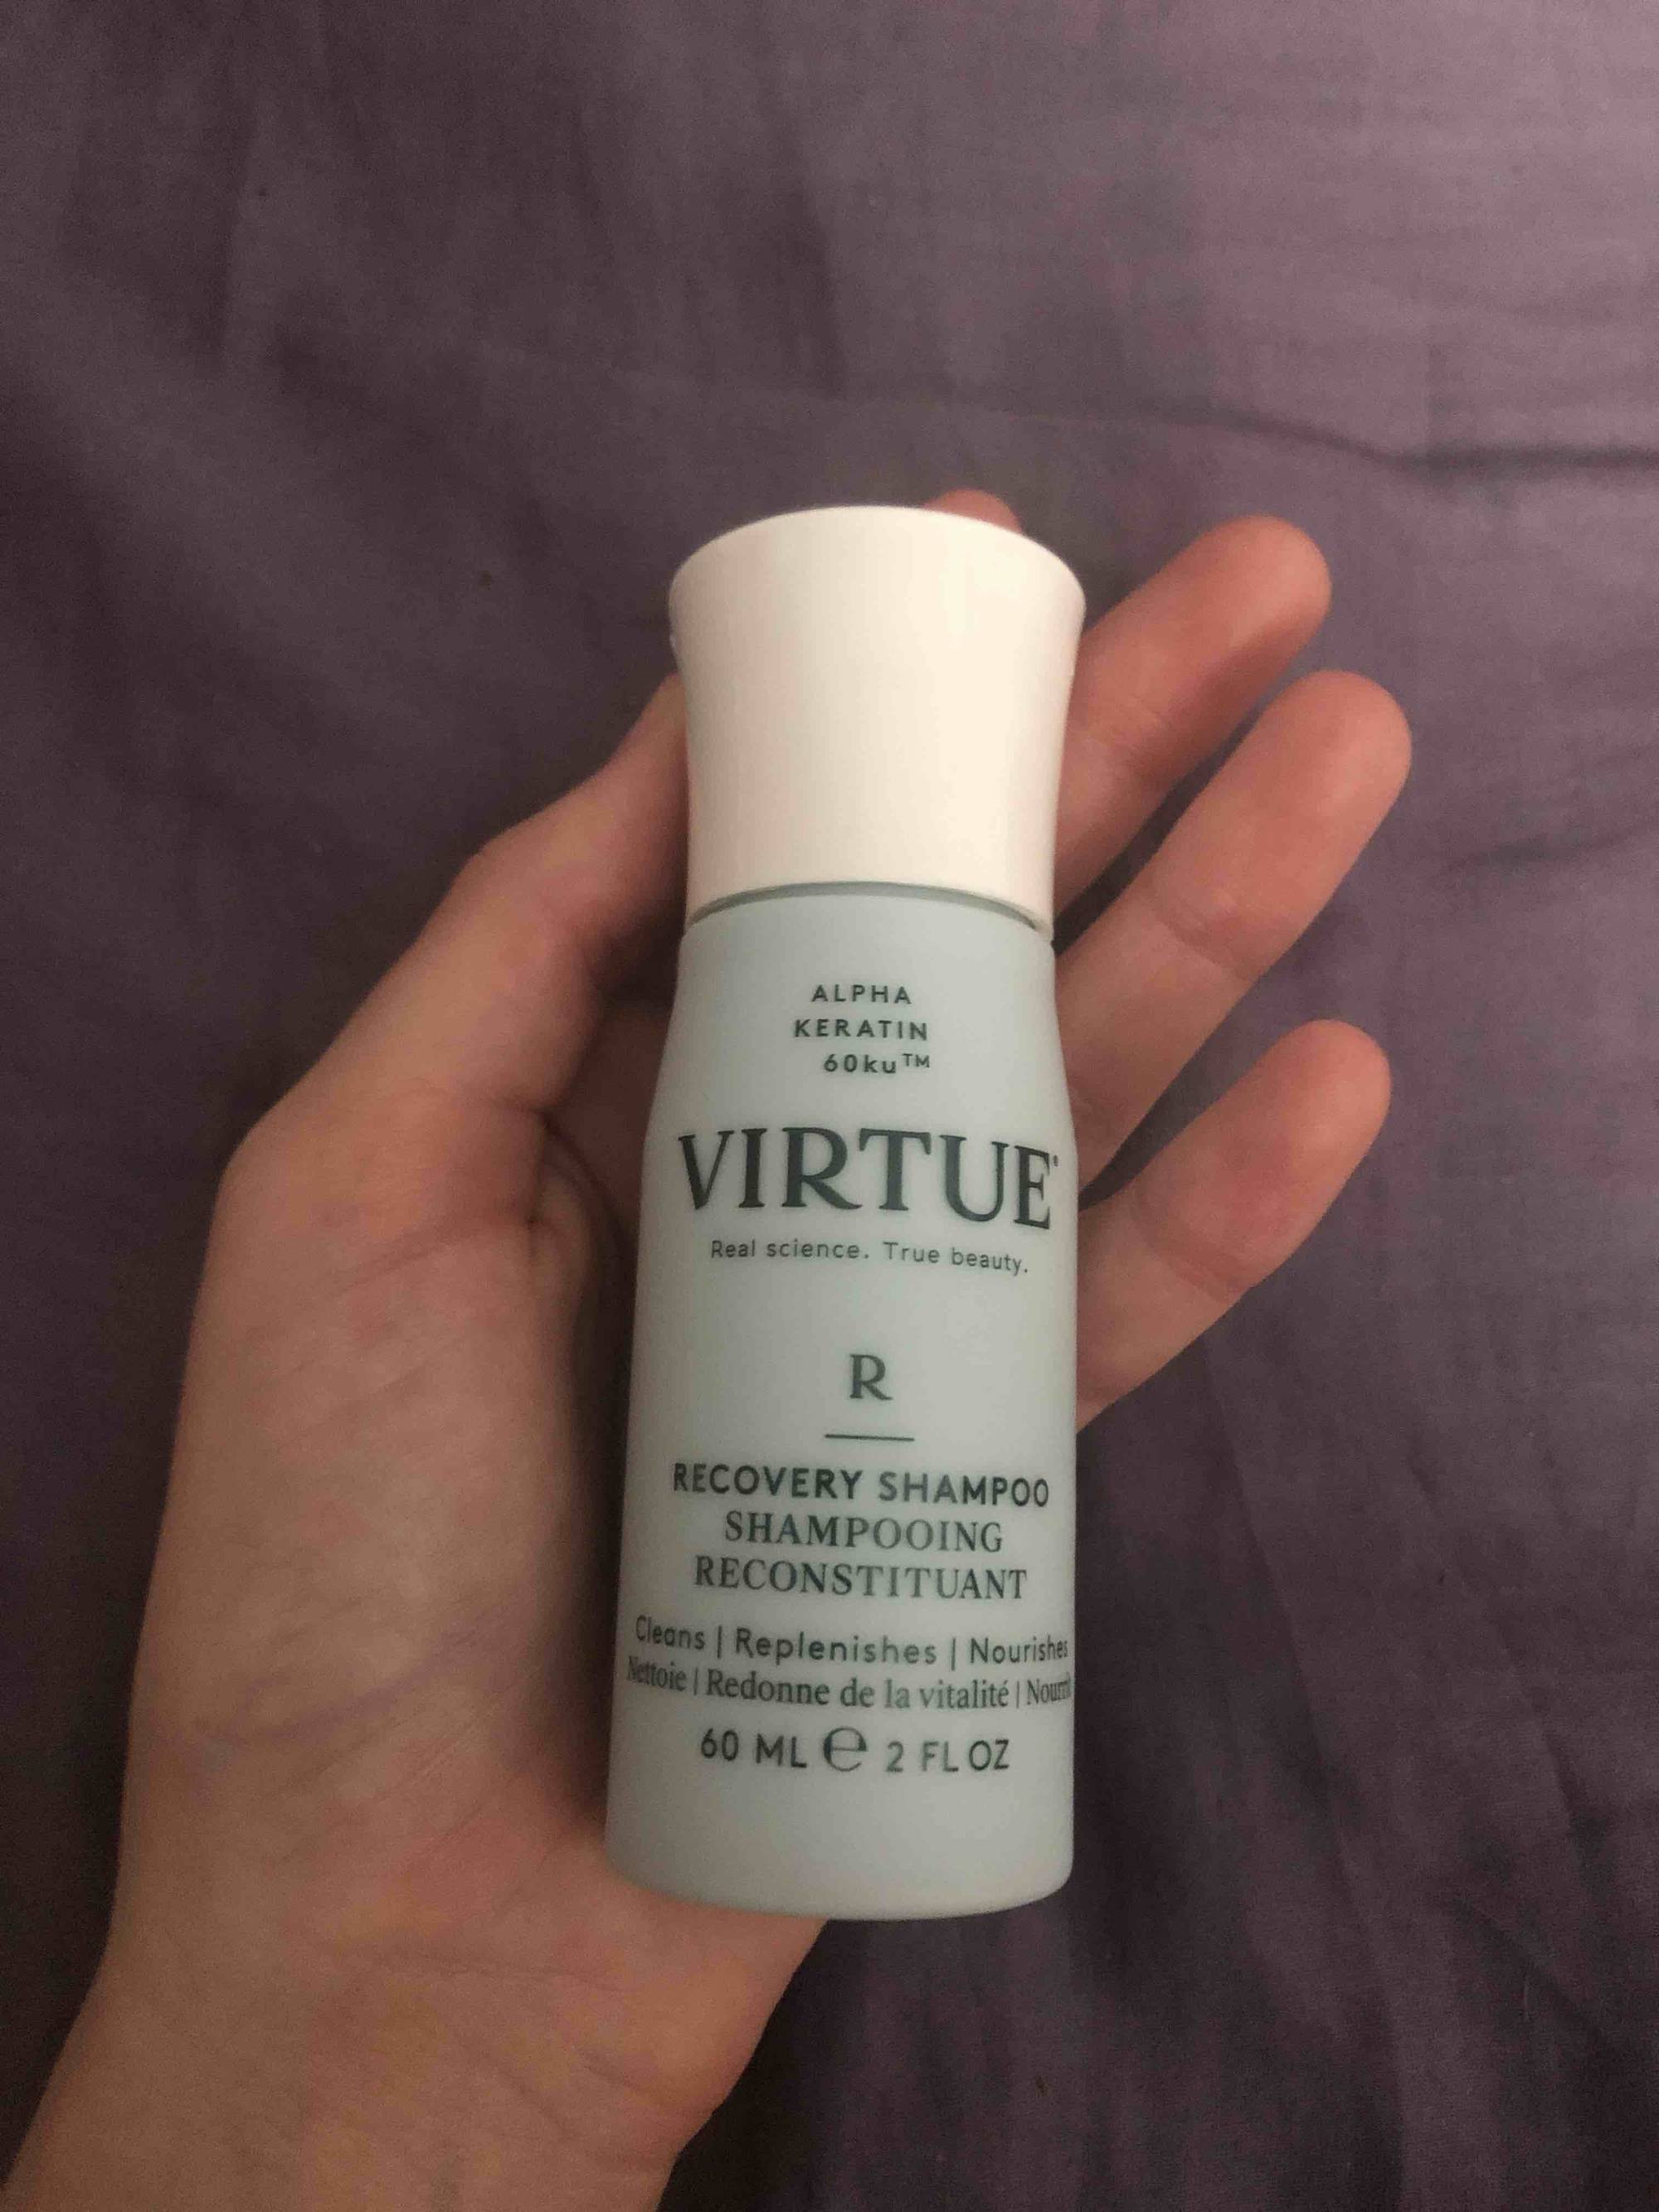 VIRTUE - Shampooing reconstituant 